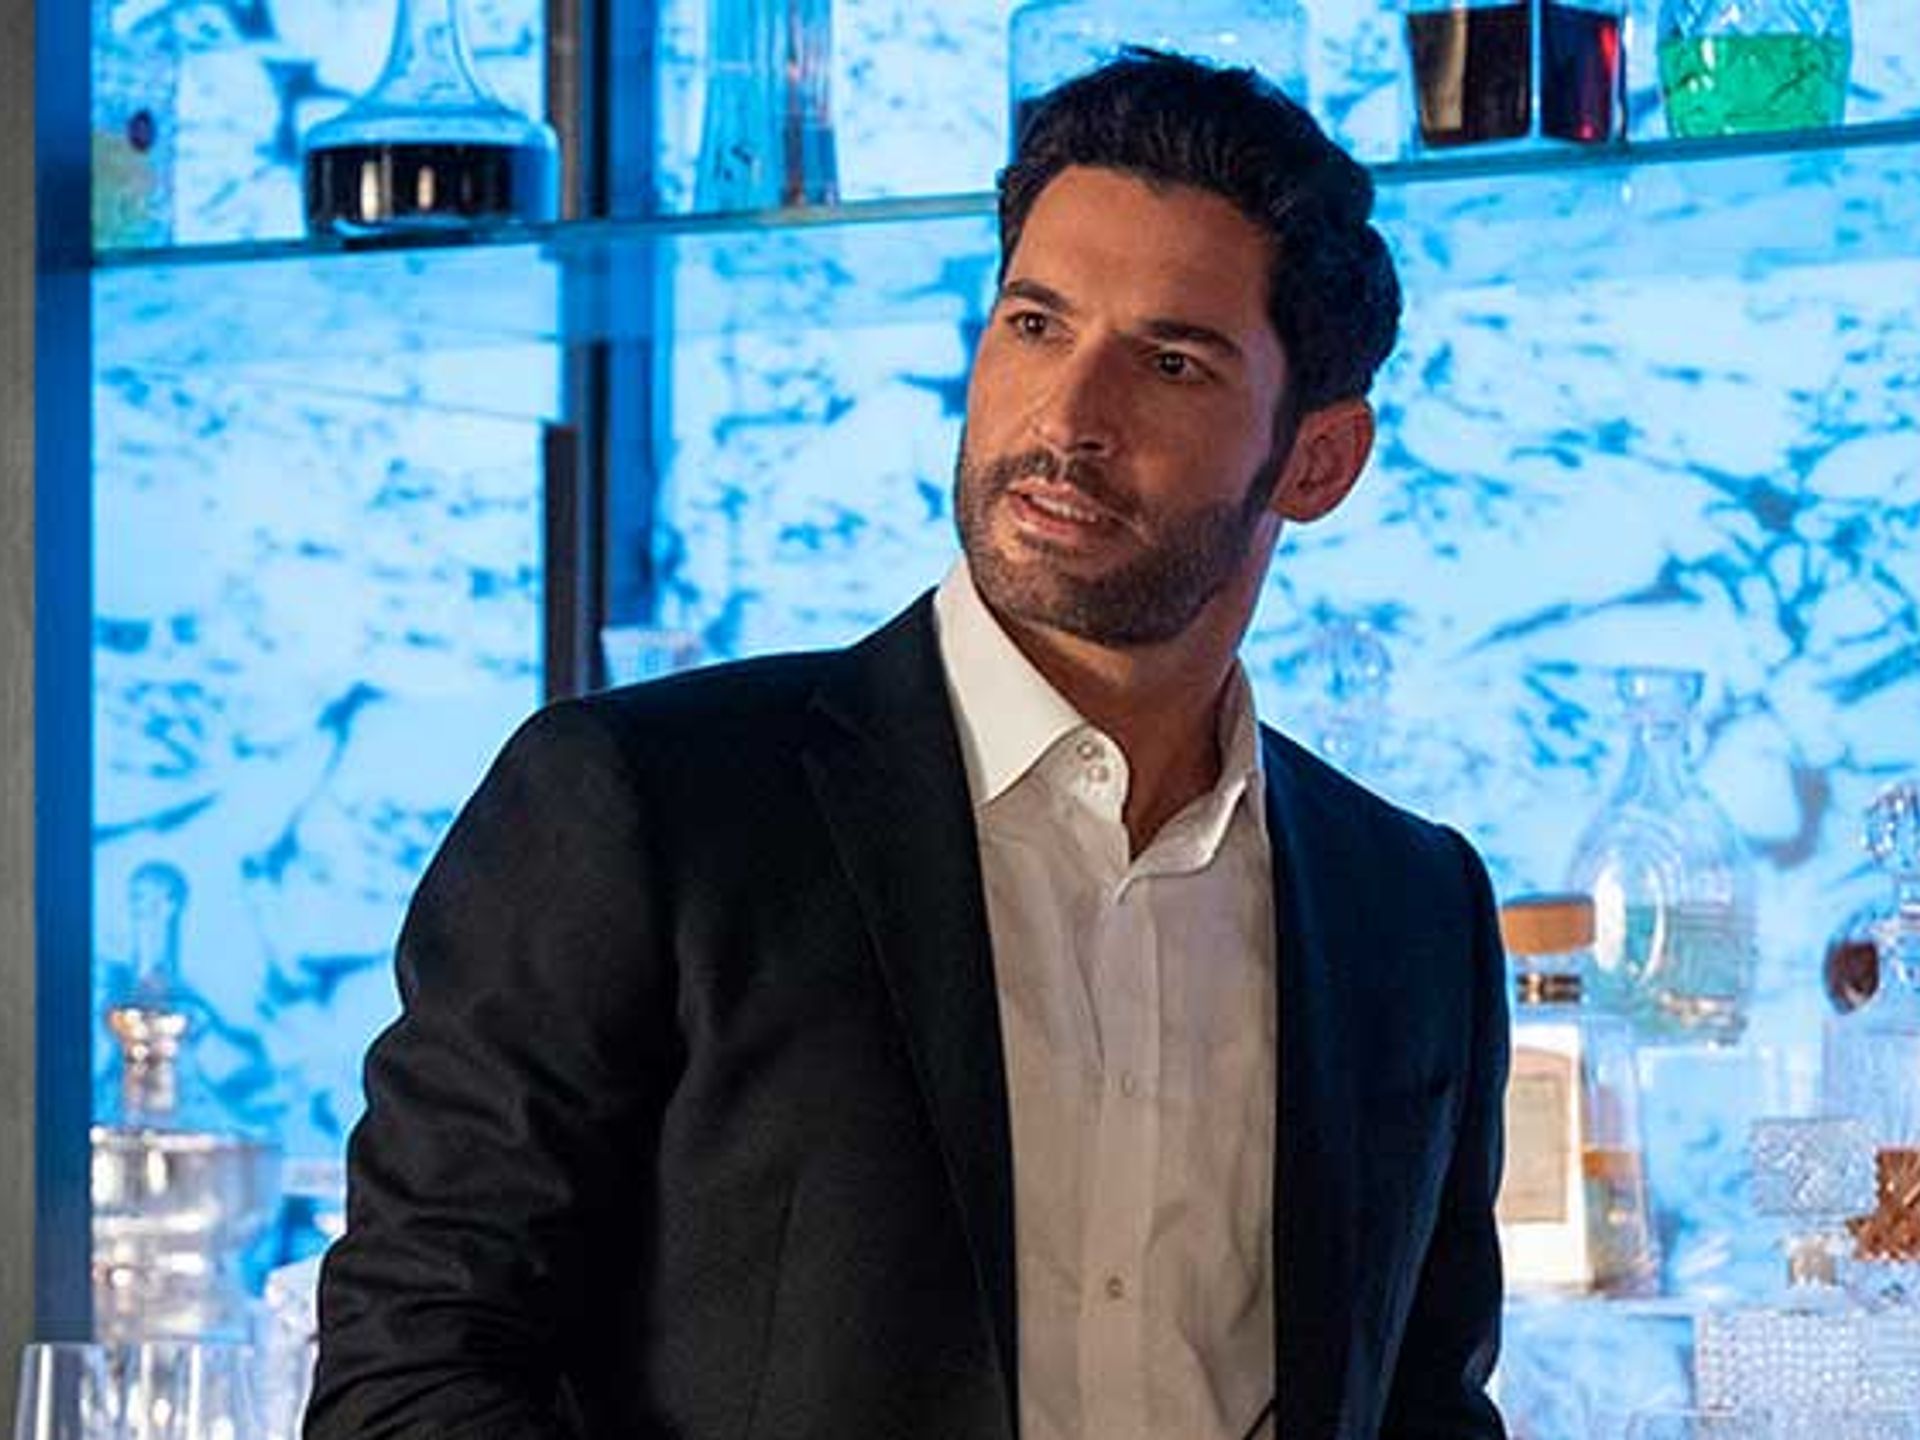 Netflix Lucifer cast: Where is the cast now and what are they up to?